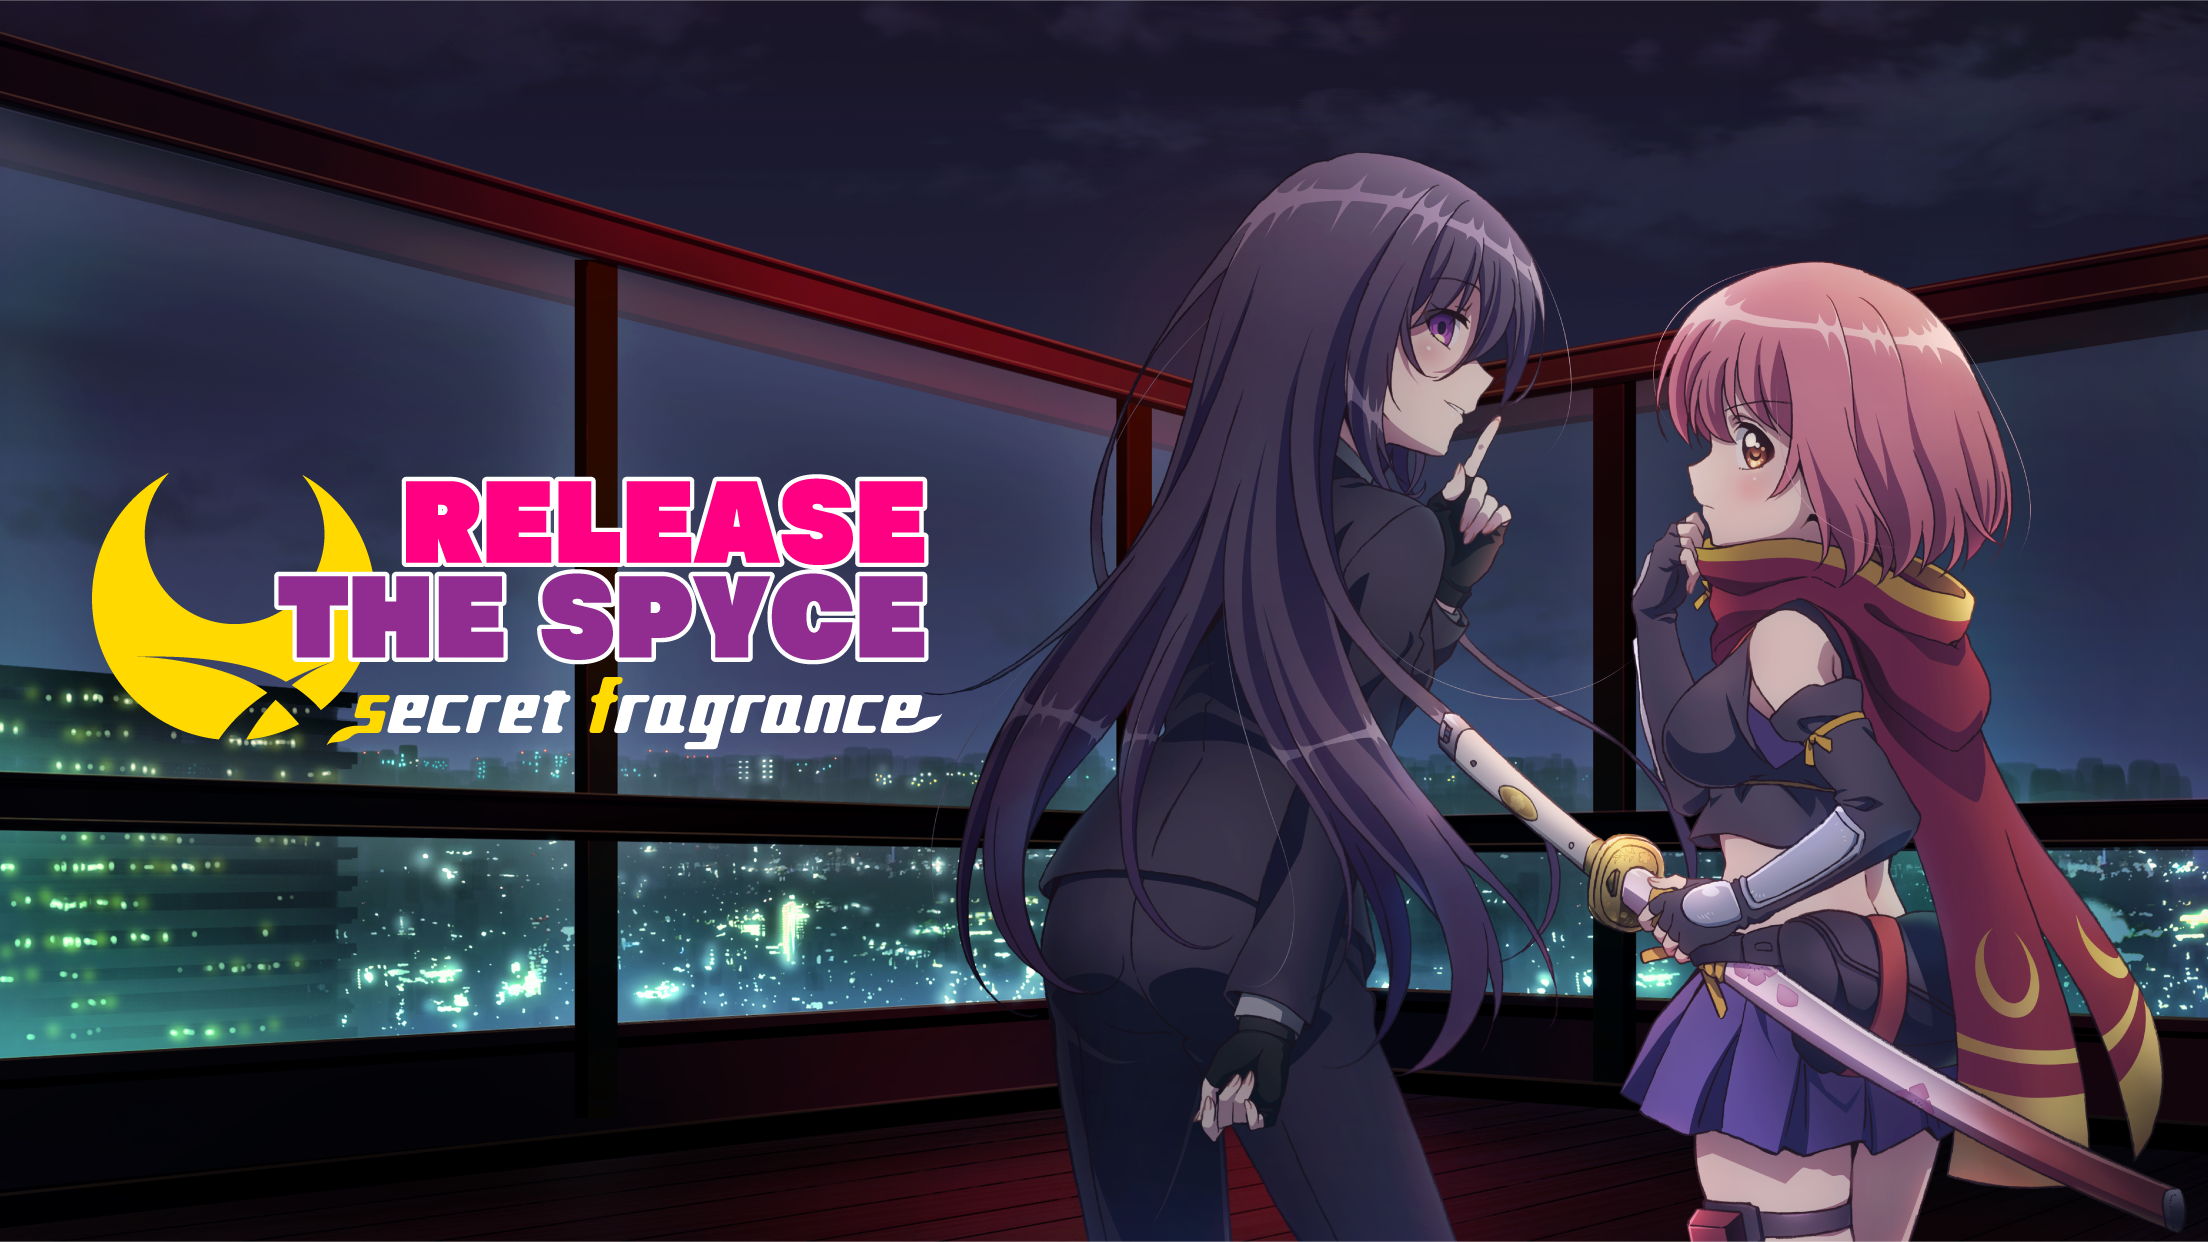 Screenshot 1 of RELEASE THE SPYCE シークレットフレグランス 1.5.0